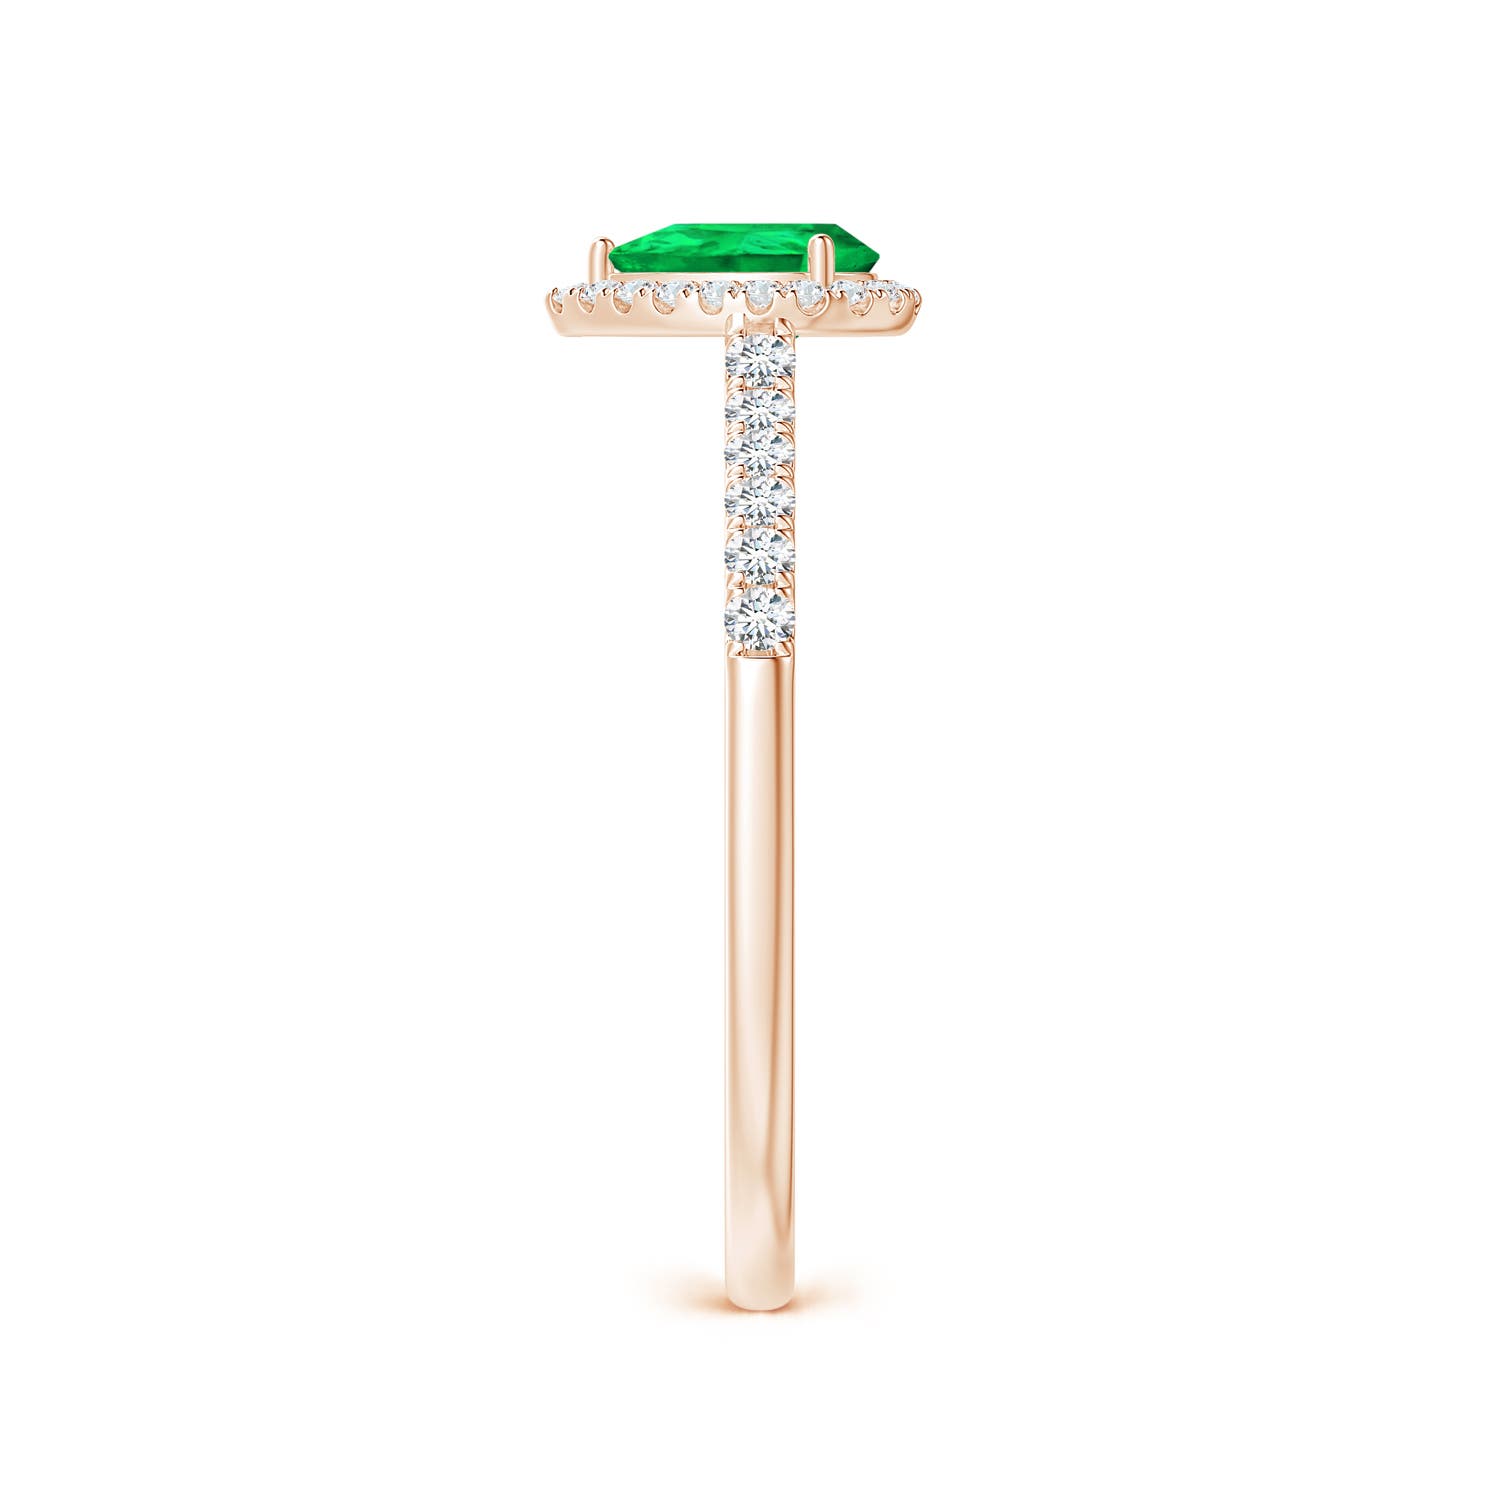 AAA - Emerald / 0.56 CT / 14 KT Rose Gold